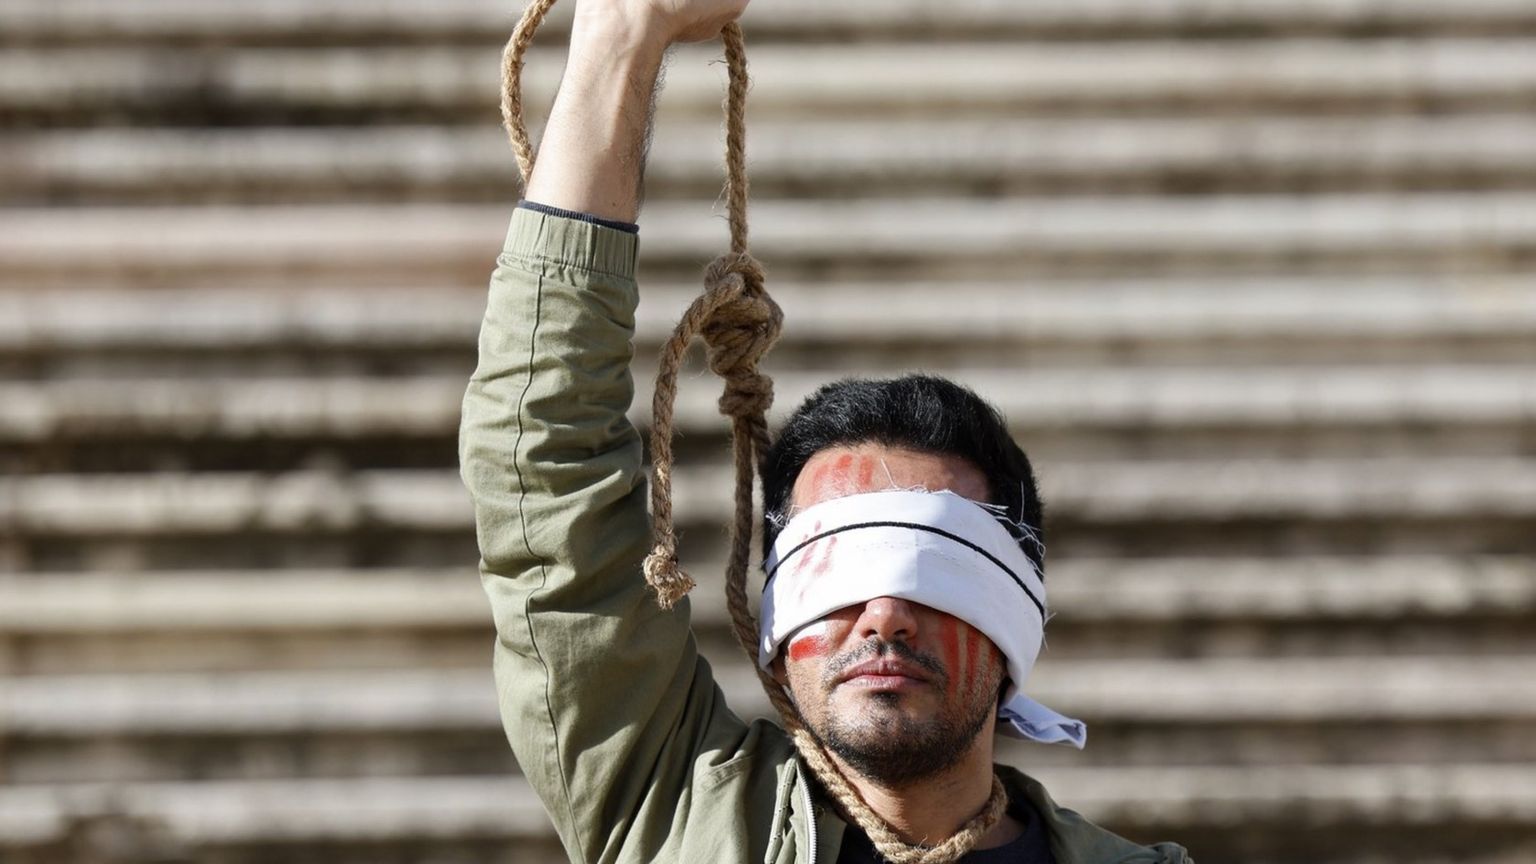 An Iranian-Portuguese man protests against the executions of two Iranian man in connection with the anti-government protests in Iran, in Lisbon, Portugal (16 December 2022)